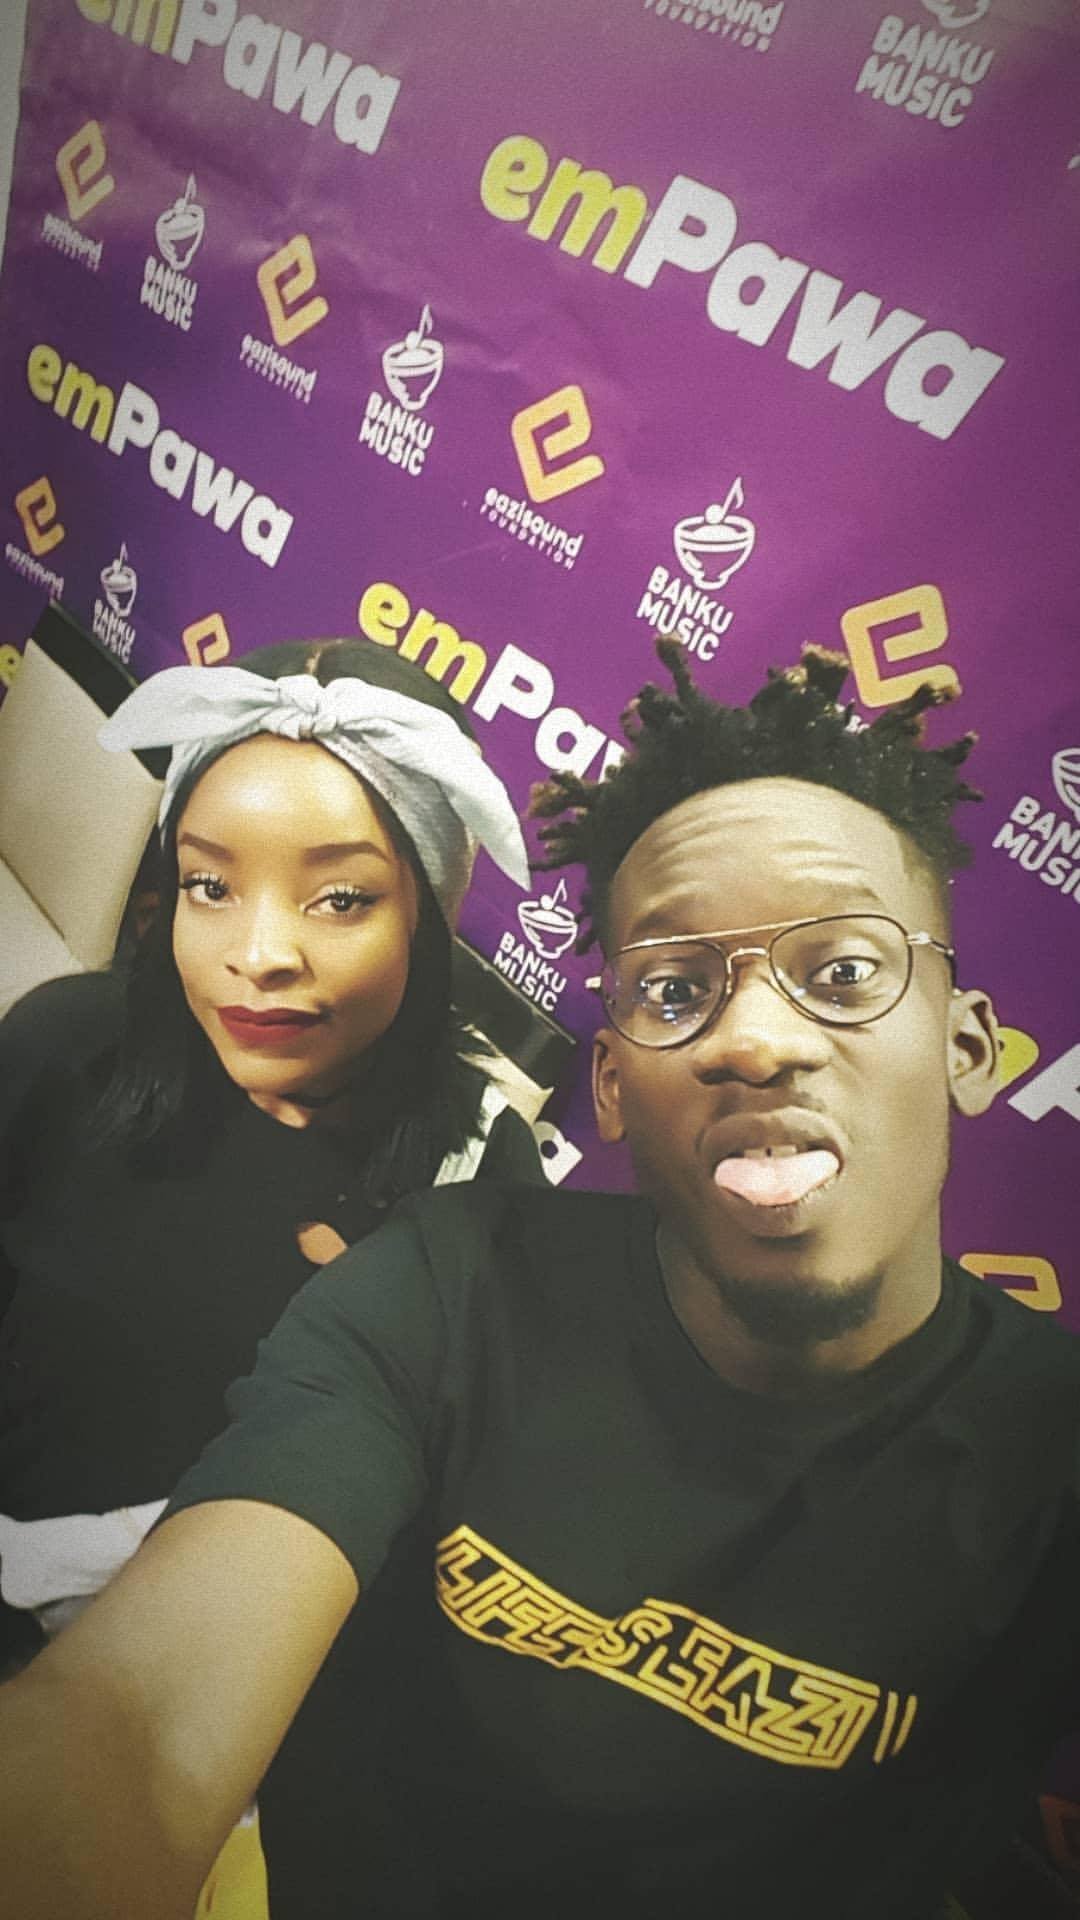 Ruth Ronnie to record a song & join Mr Eazi in South Africa